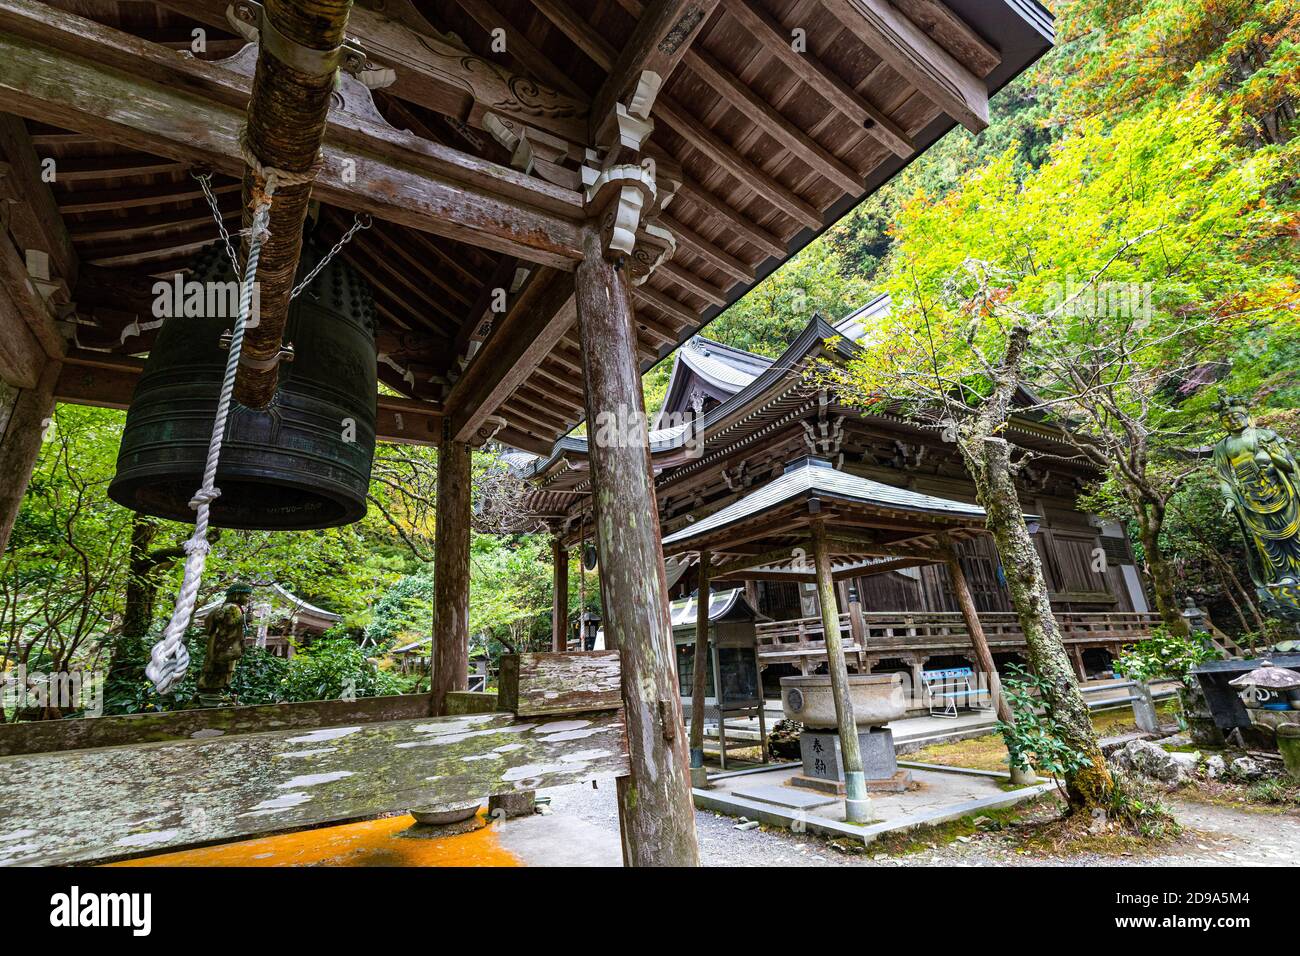 Temple 44 Daihoji 'The temple of Great Treasure' stands in a forest of ancient cedar and cypress trees in the area known as Kuma Highland in central E Stock Photo